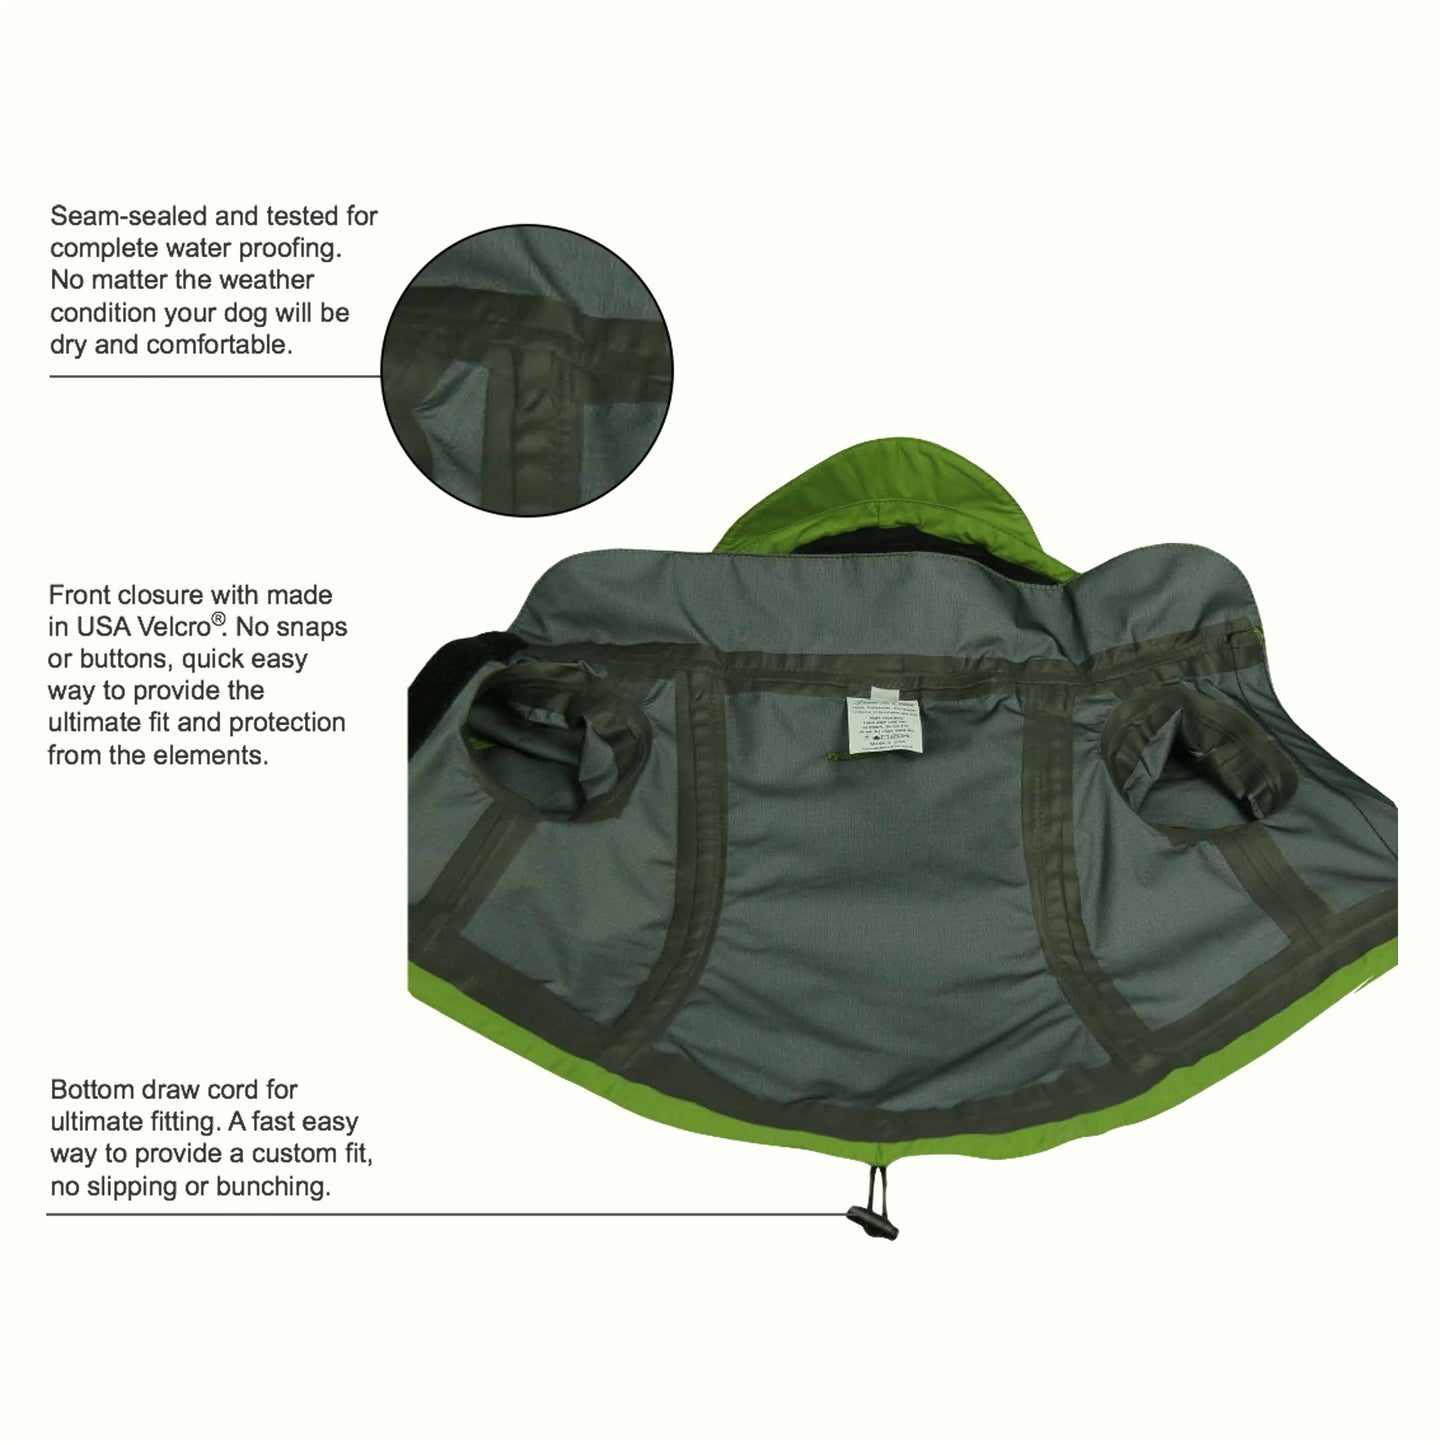 Small dog jacket green full length interior feature detail